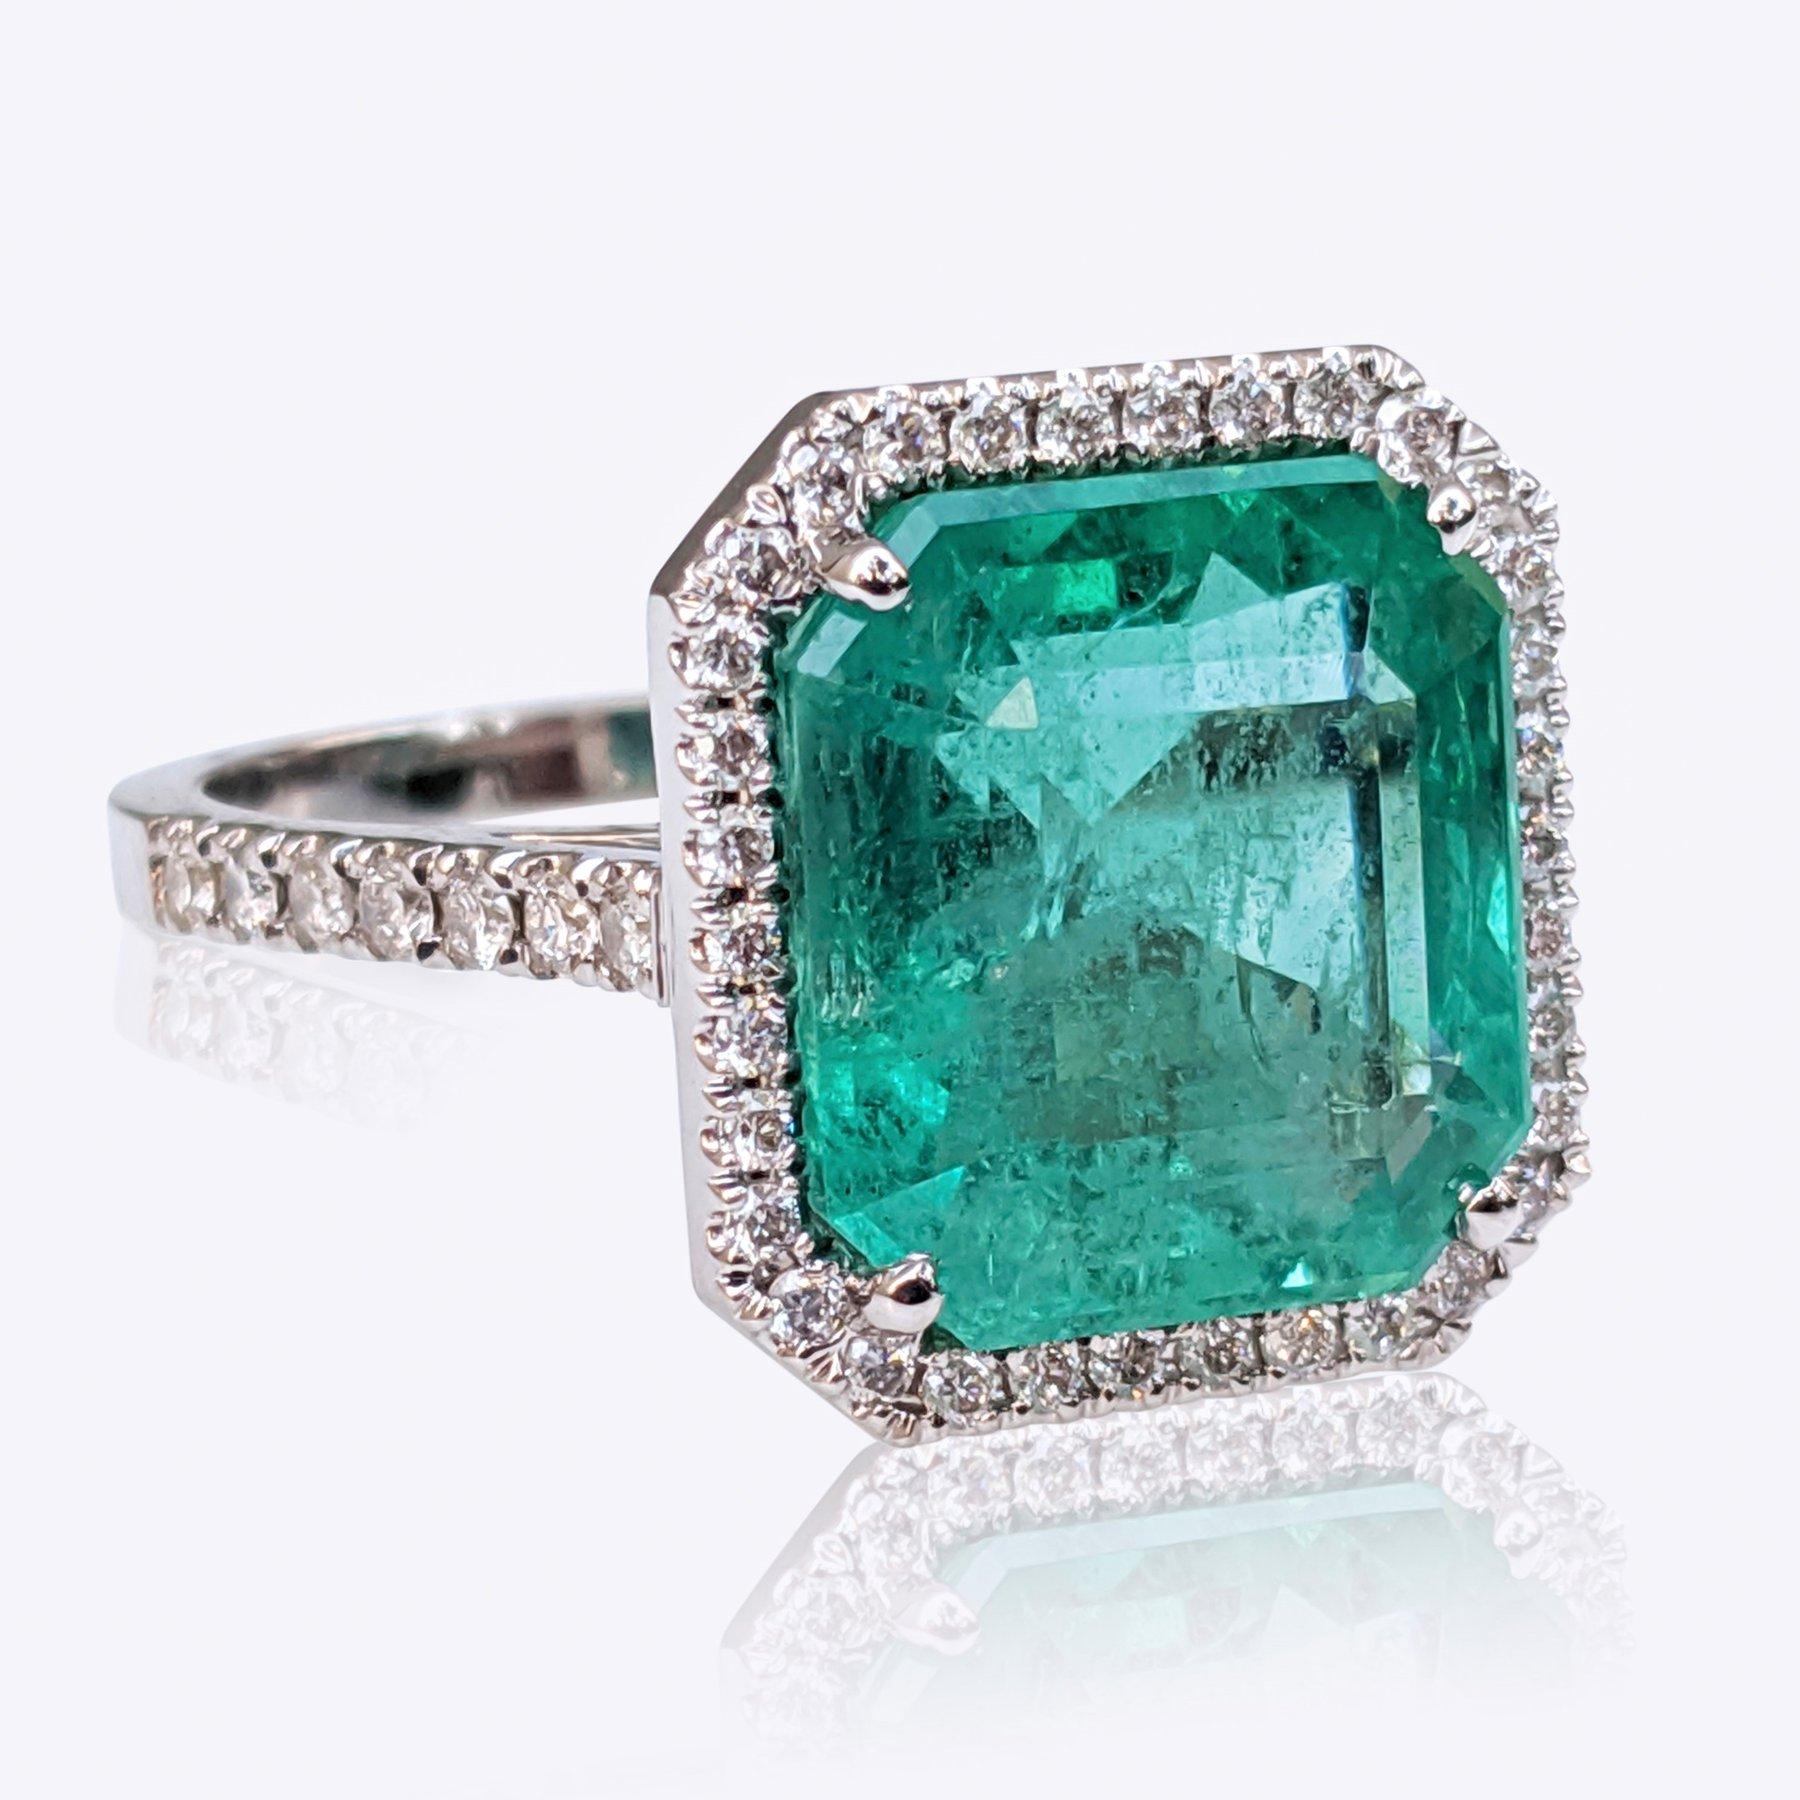 NO RESERVE 8.15Ct Emerald & 0.65Ct D-F Diamonds - 18 kt. White gold - Ring For Sale 2